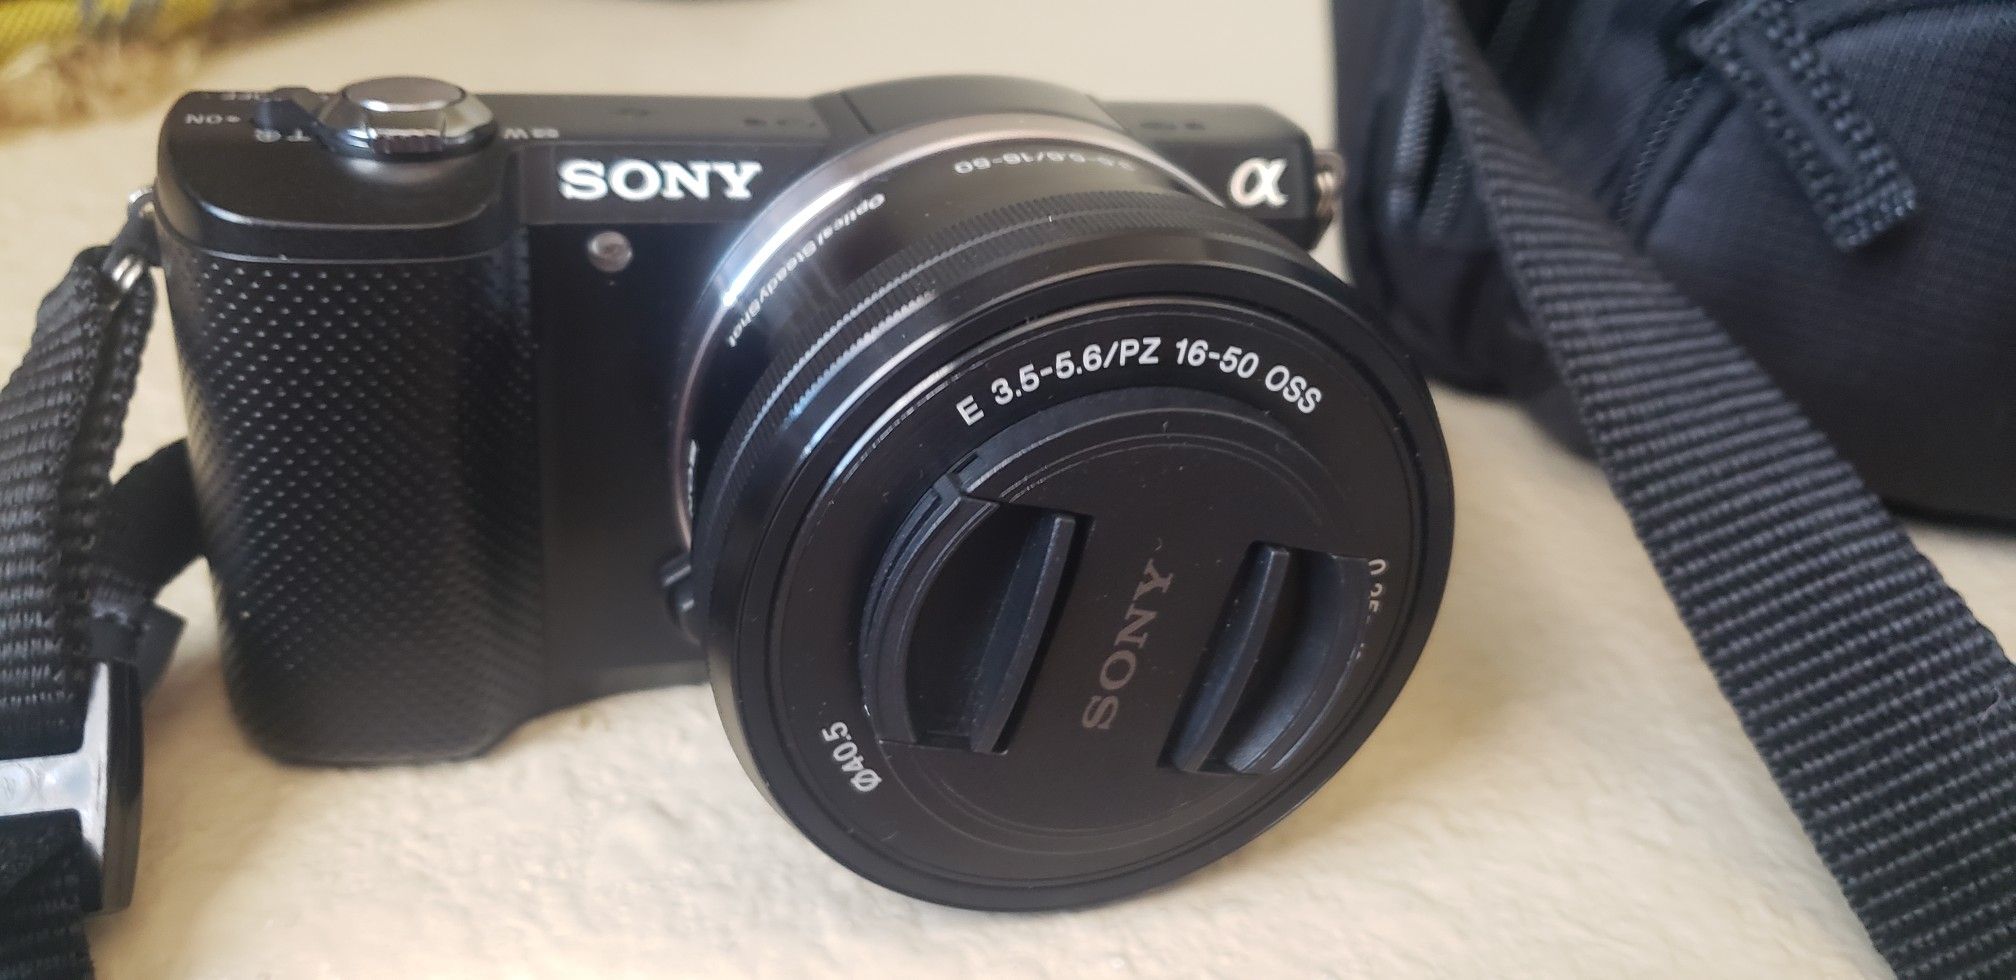 Sony Alpha a5000 Mirrorless Digital Camera with 16-50mm OSS Lens (Black) plus with 55-210mm F4.5-6.3 Lens